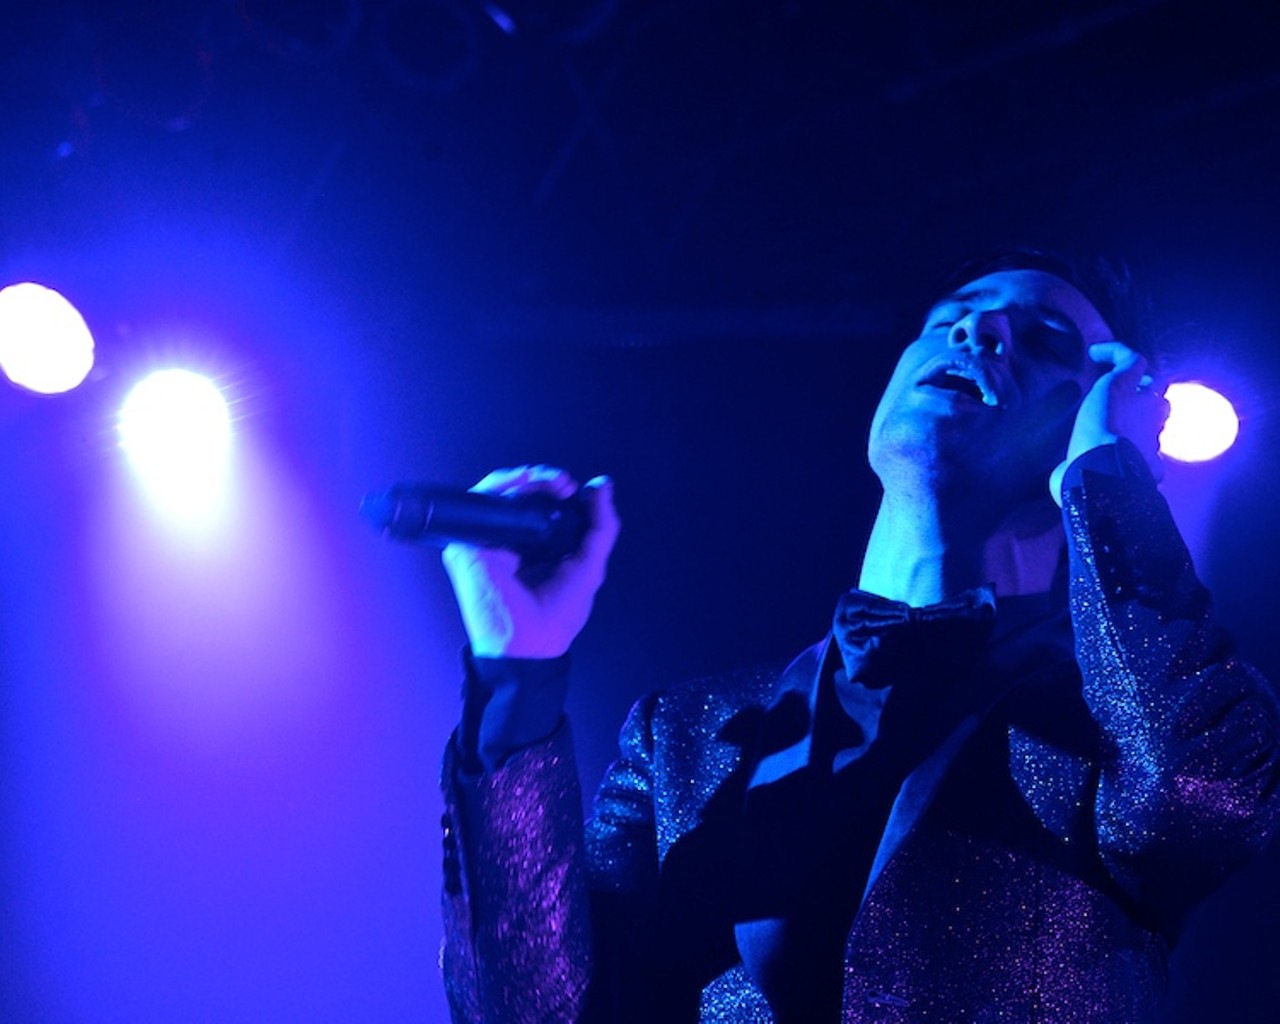 Panic at the Disco performing last night at House of Blues